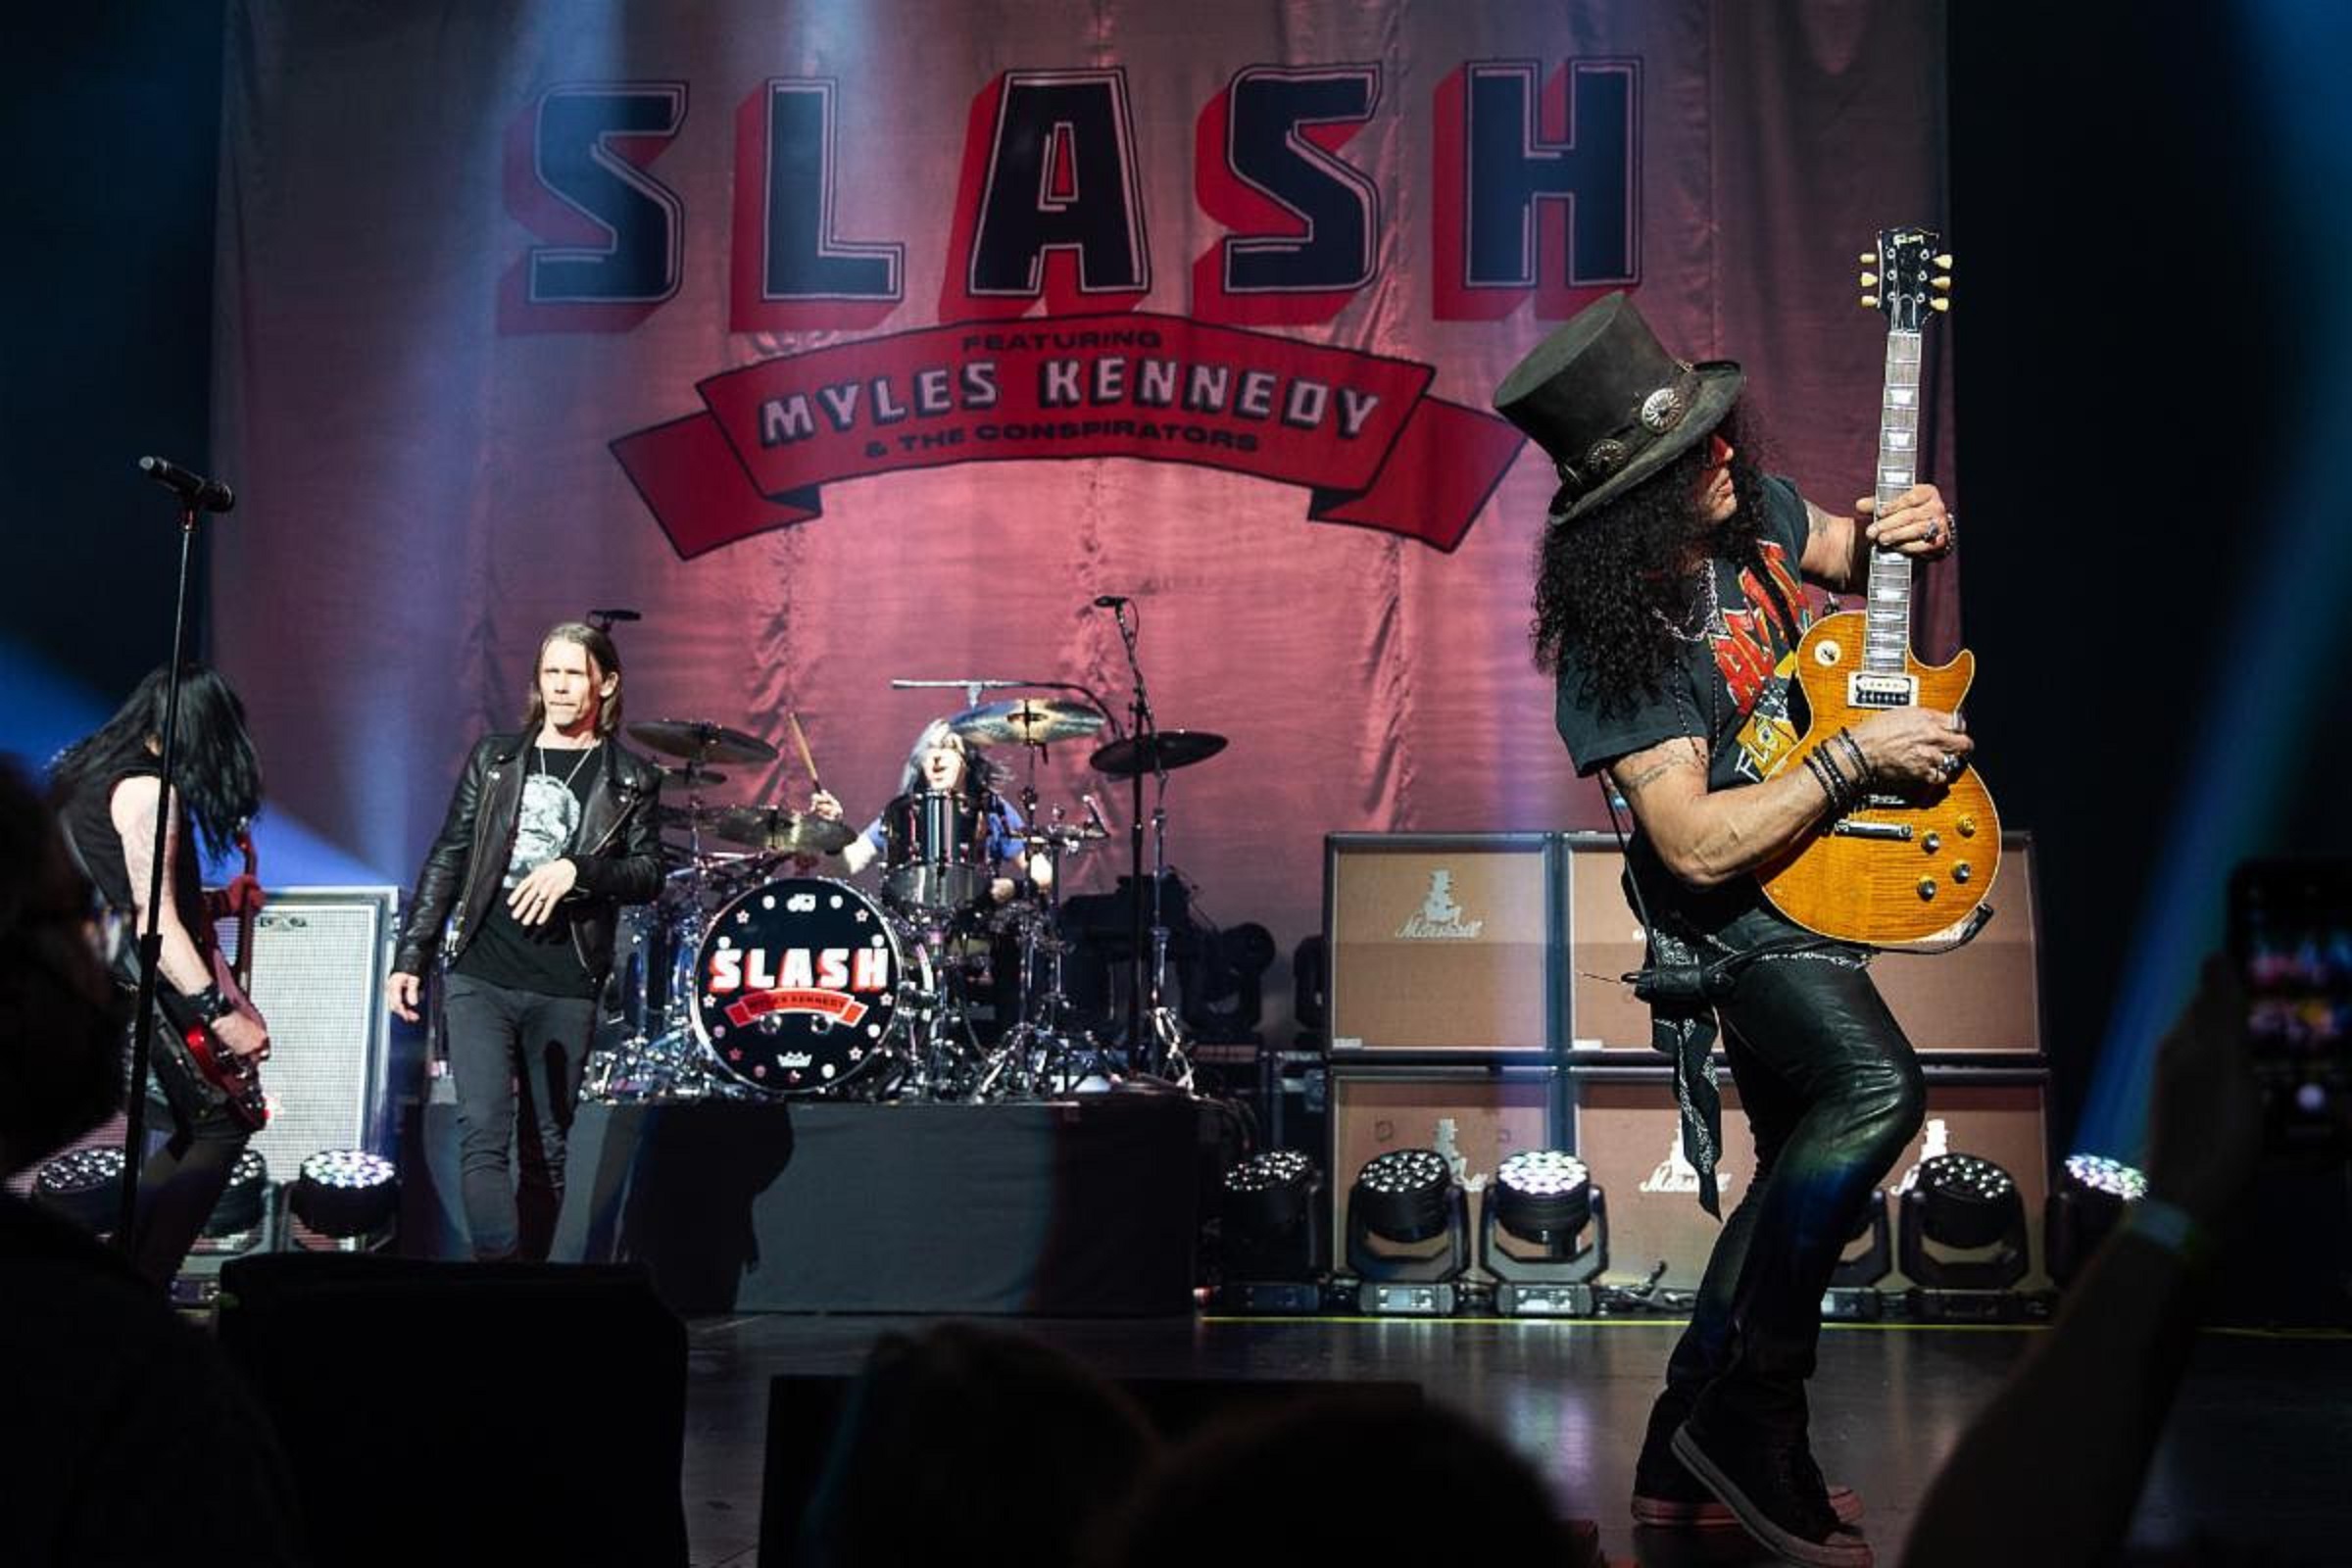 Tune-In To Watch Slash Ft. Myles Kennedy & The Conspirators Worldwide Streaming Event Tomorrow, Fri., April 15 at 12 p.m. PT On Veeps